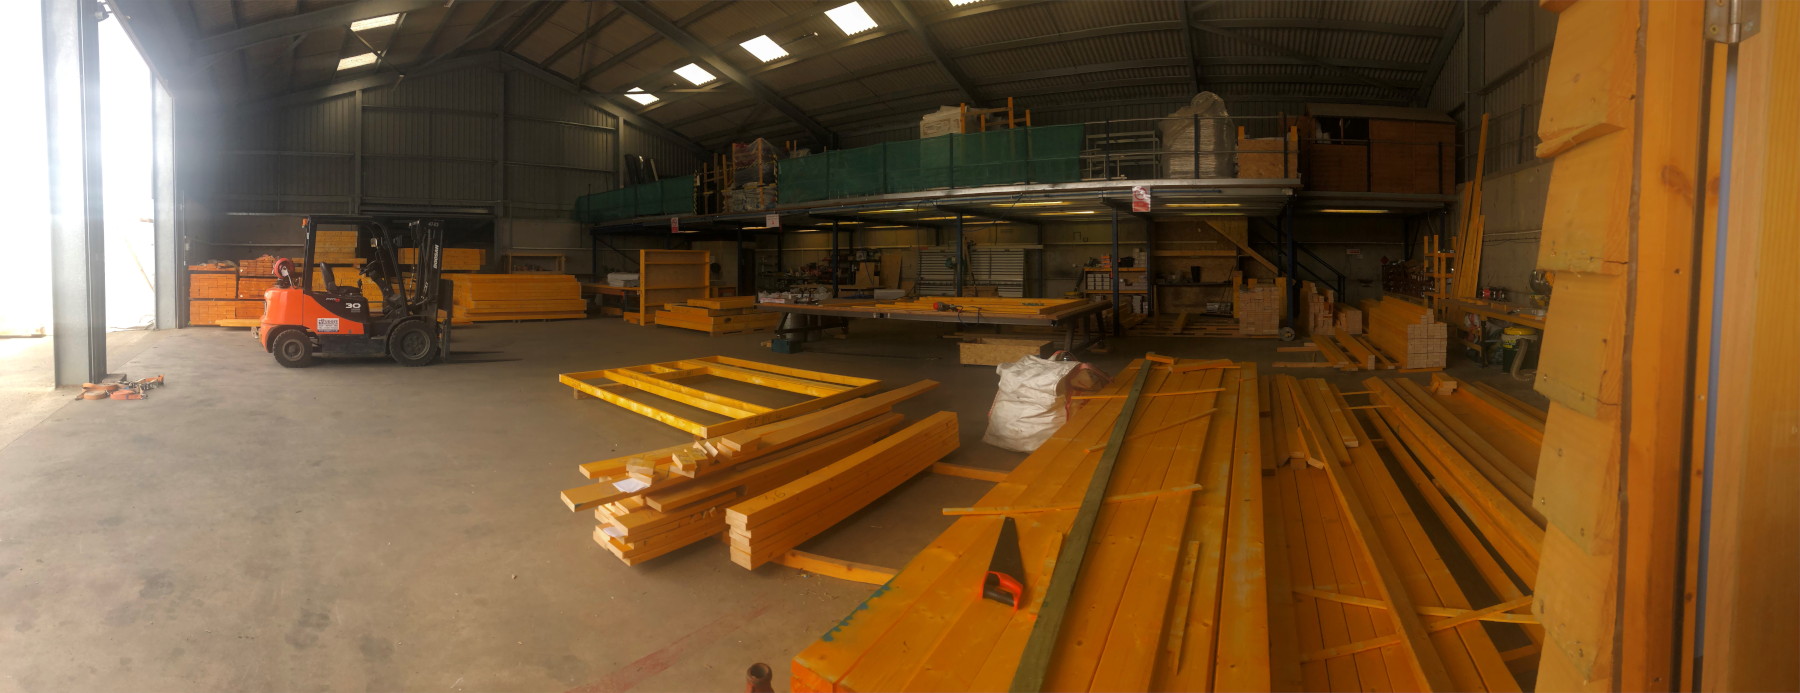 Timber Frame Manufacturing facility